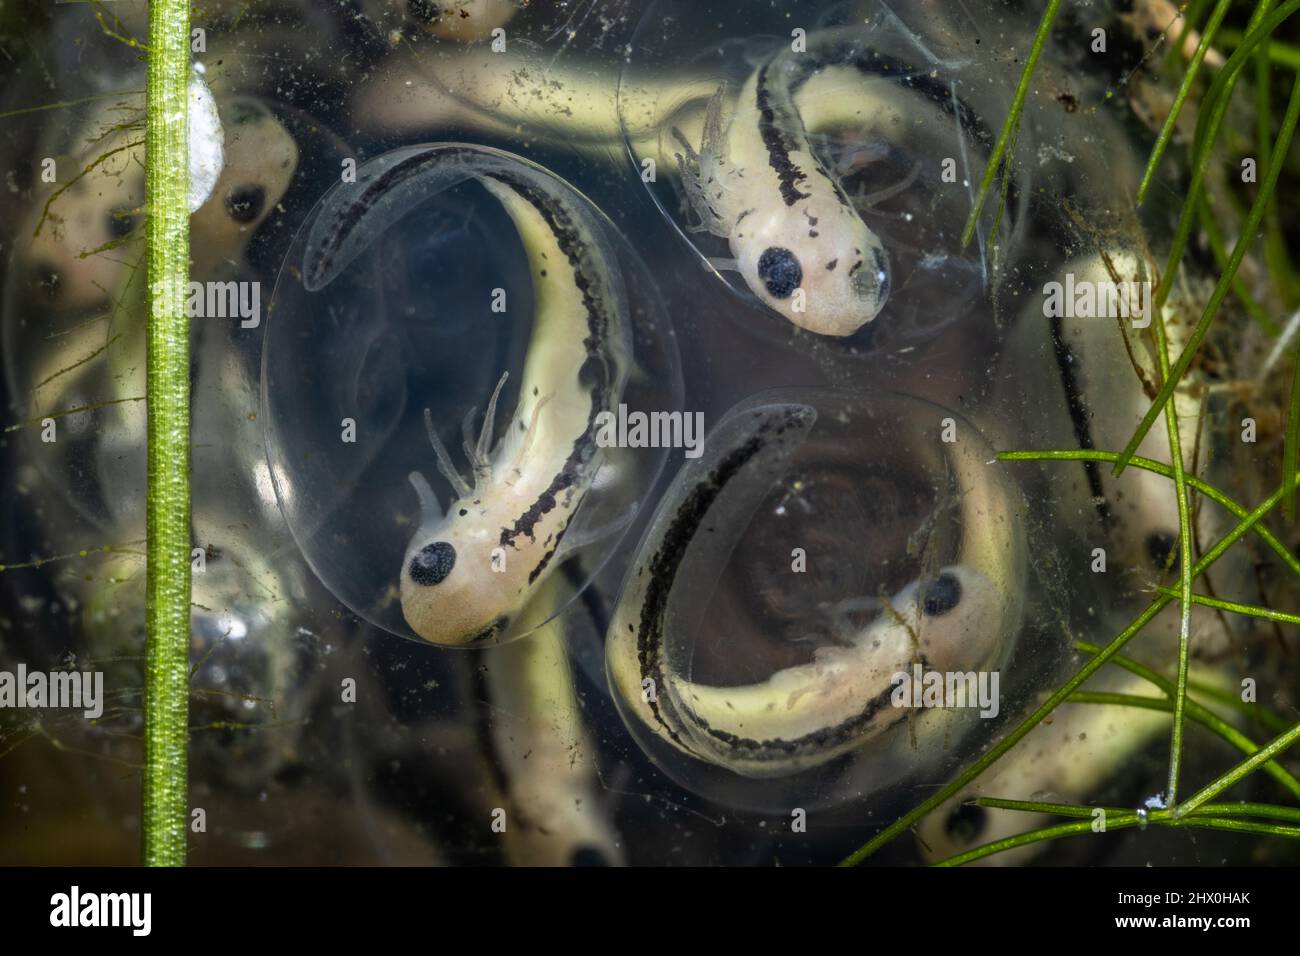 Larval California newts (Taricha torosa) develop inside the egg clutch in a freshwater pond, the larval amphibians will soon hatch and swim away. Stock Photo